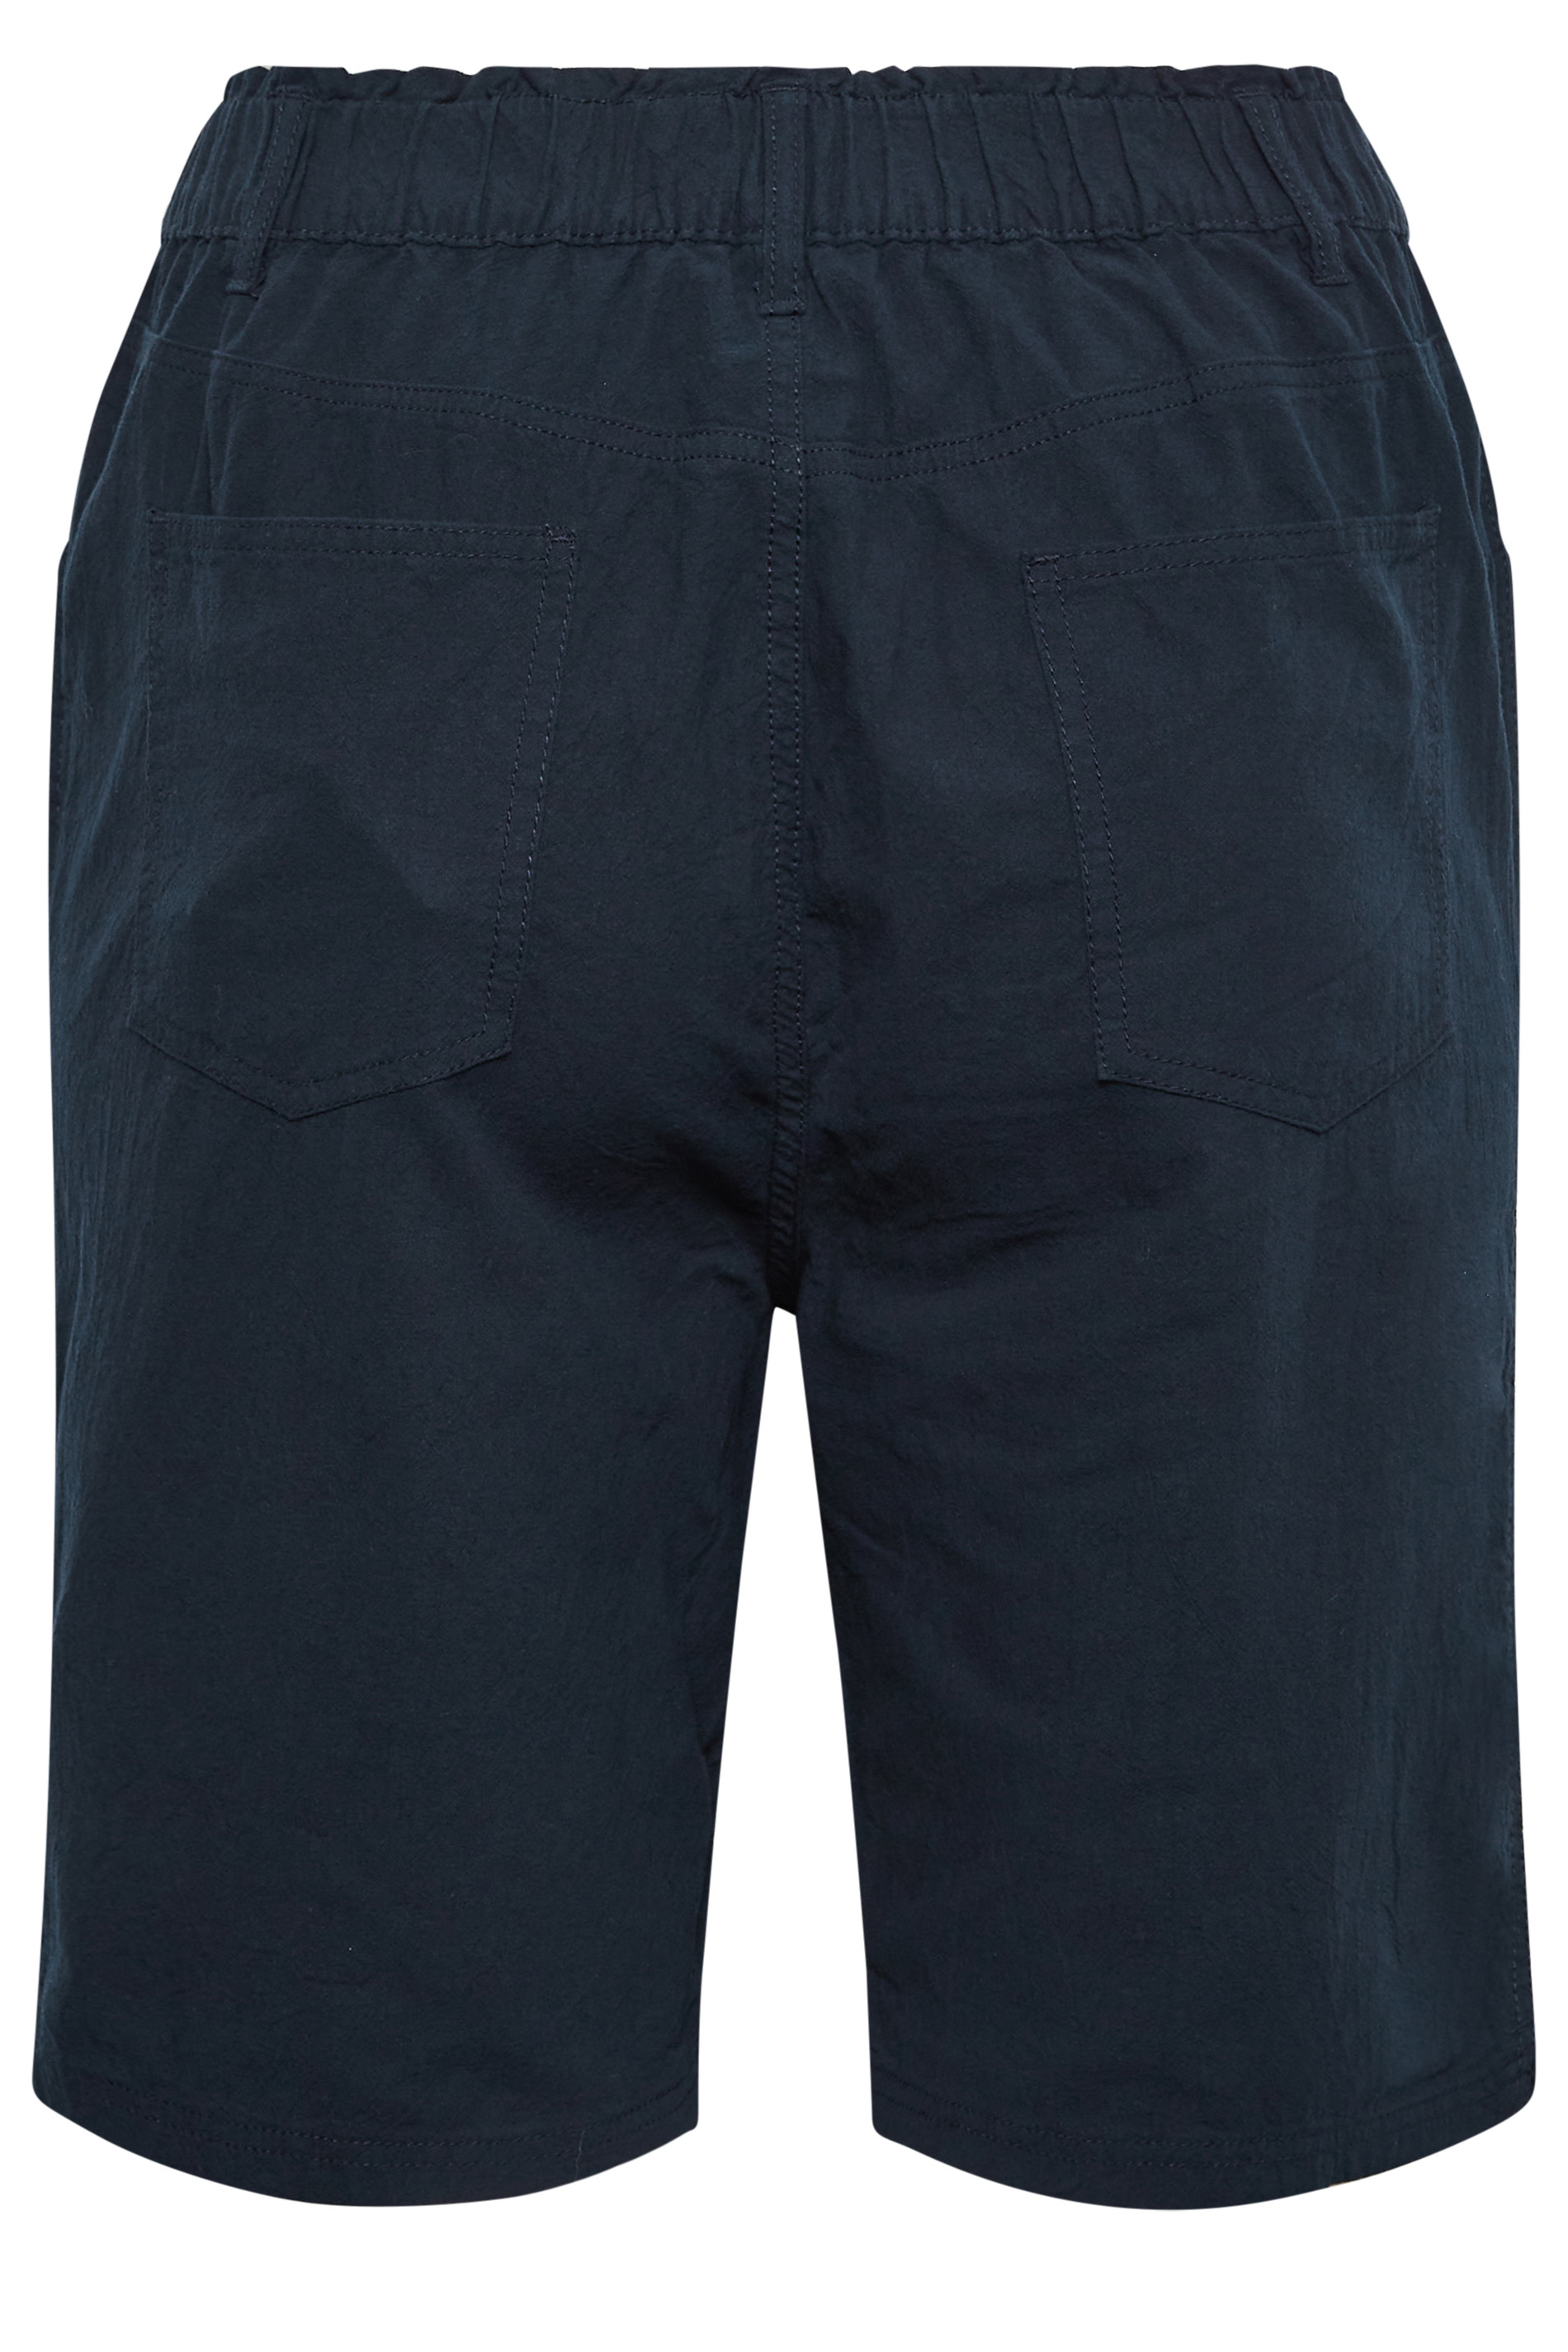 YOURS Plus Size Navy Blue Cool Cotton Shorts | Yours Clothing